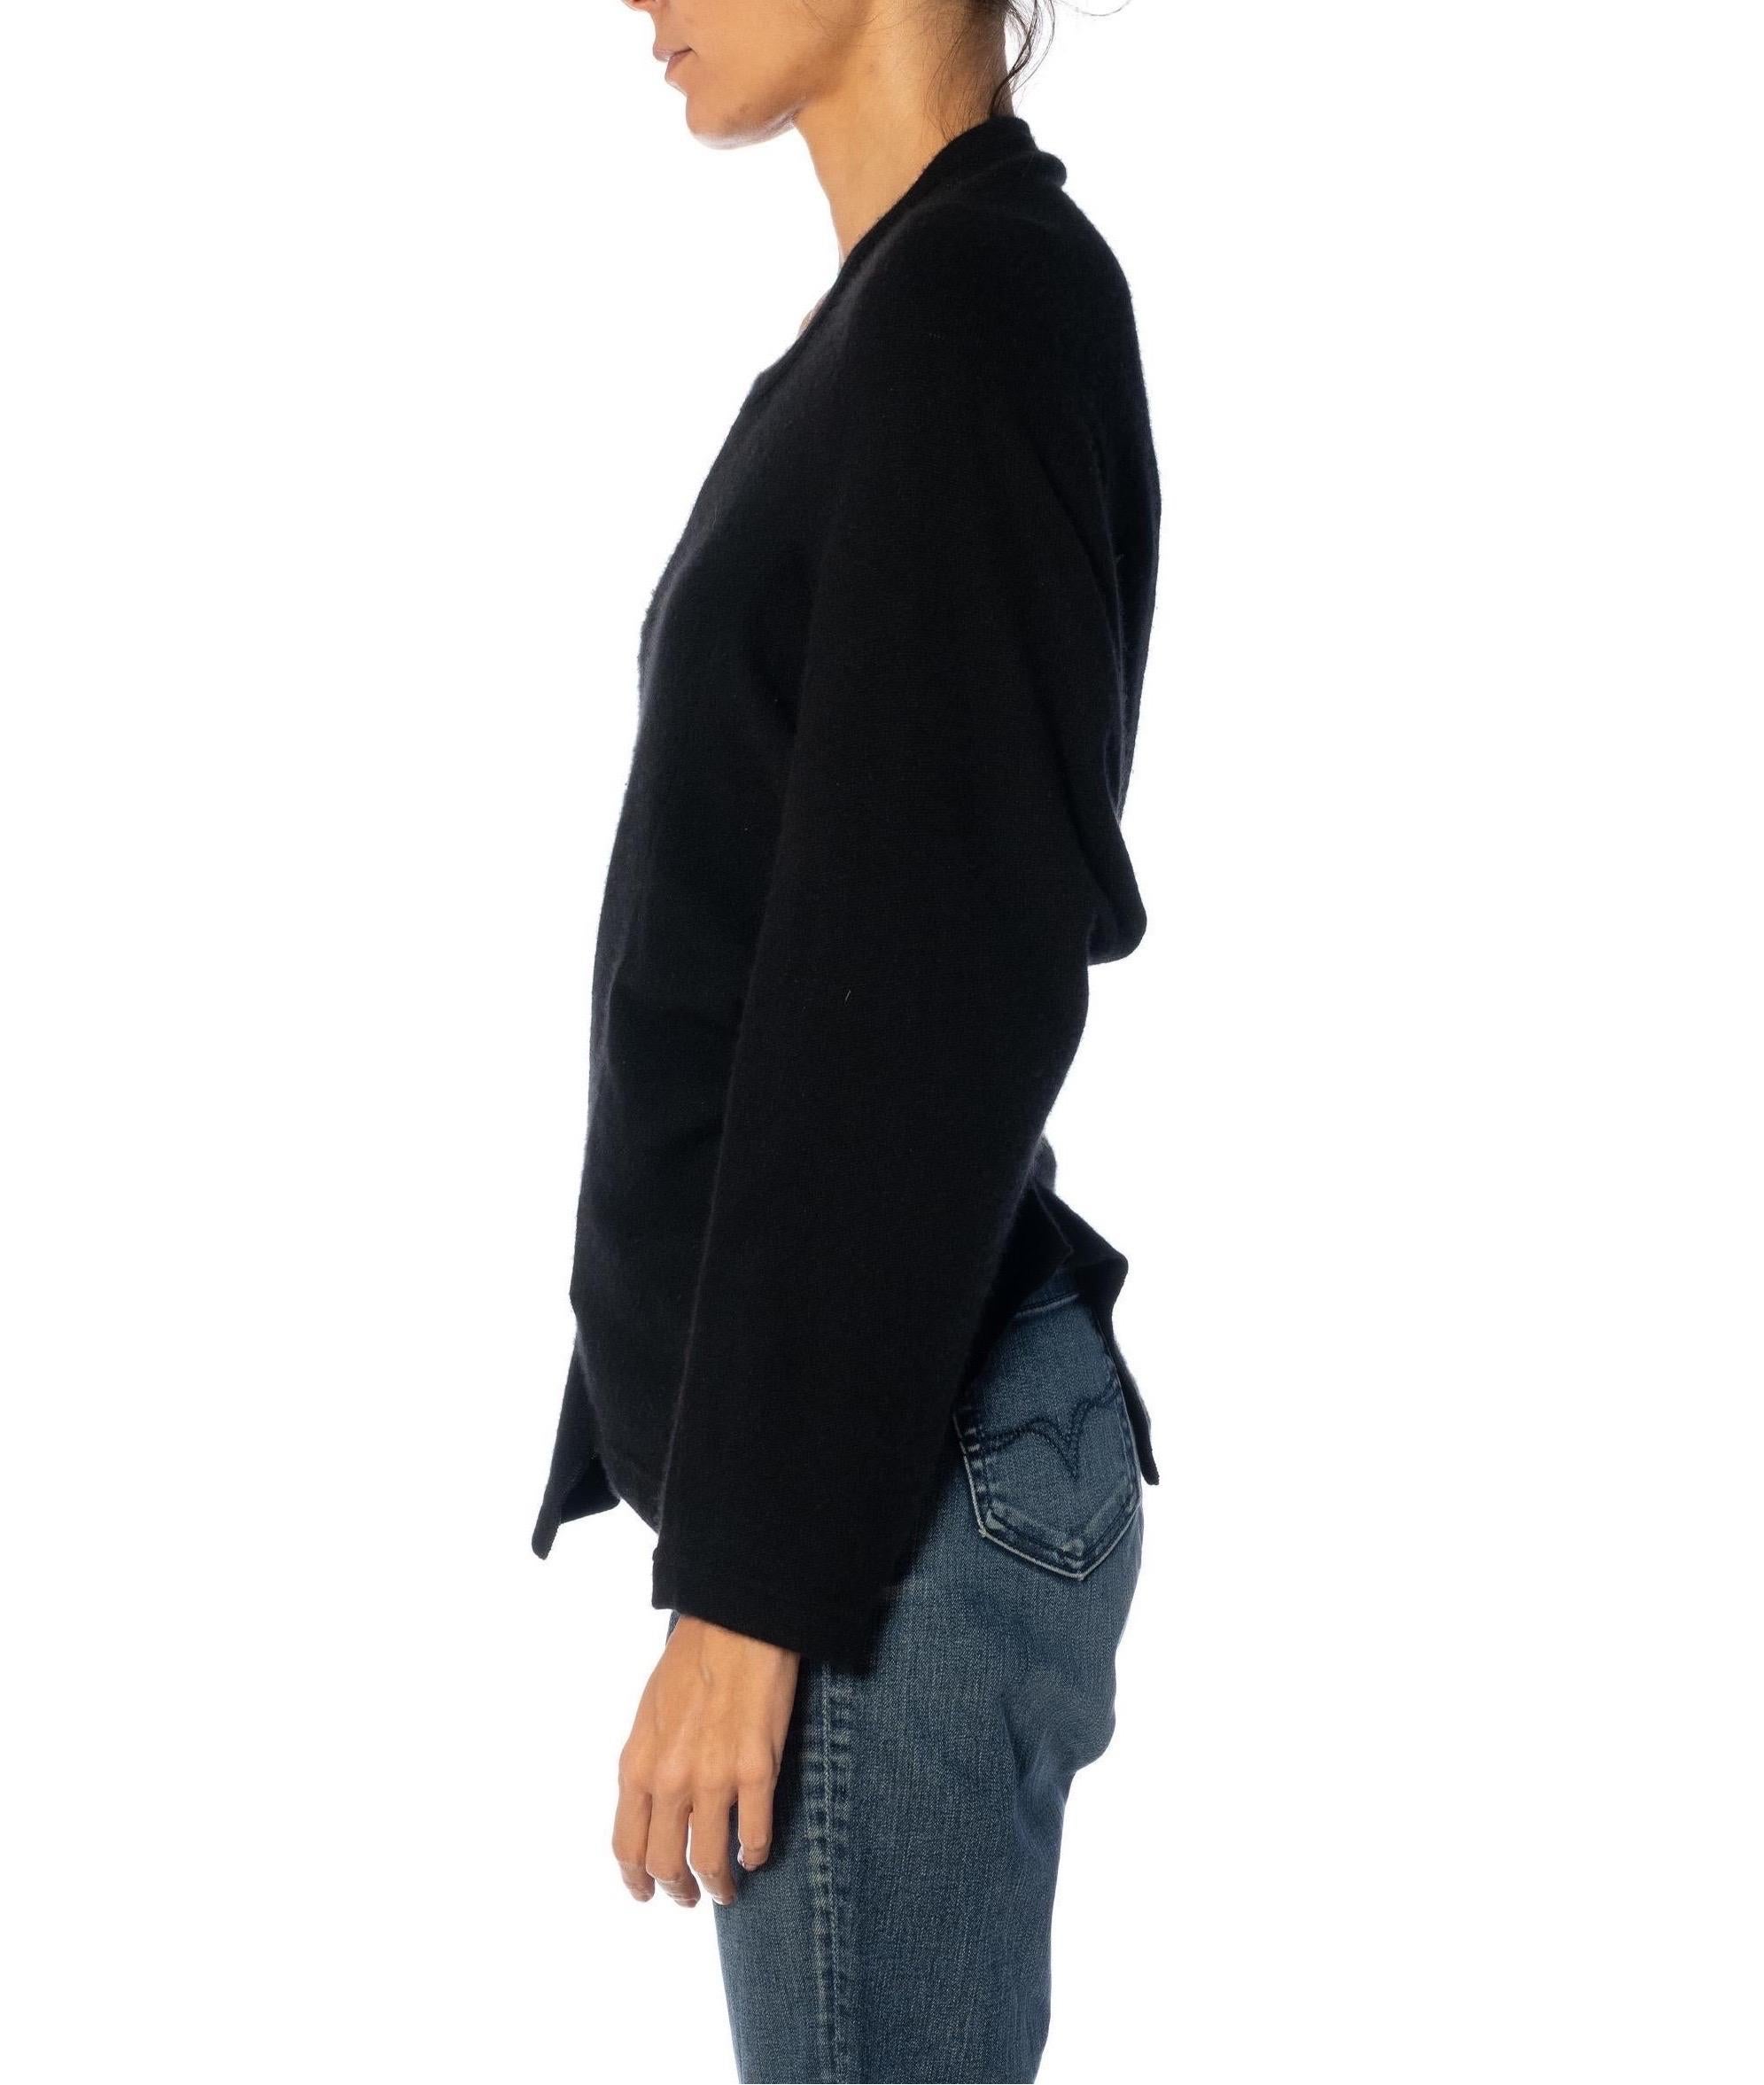 Women's 2000S COMME DES GARCONS Black Cashmere Asymmetrically Seamed Sweater 2004 For Sale